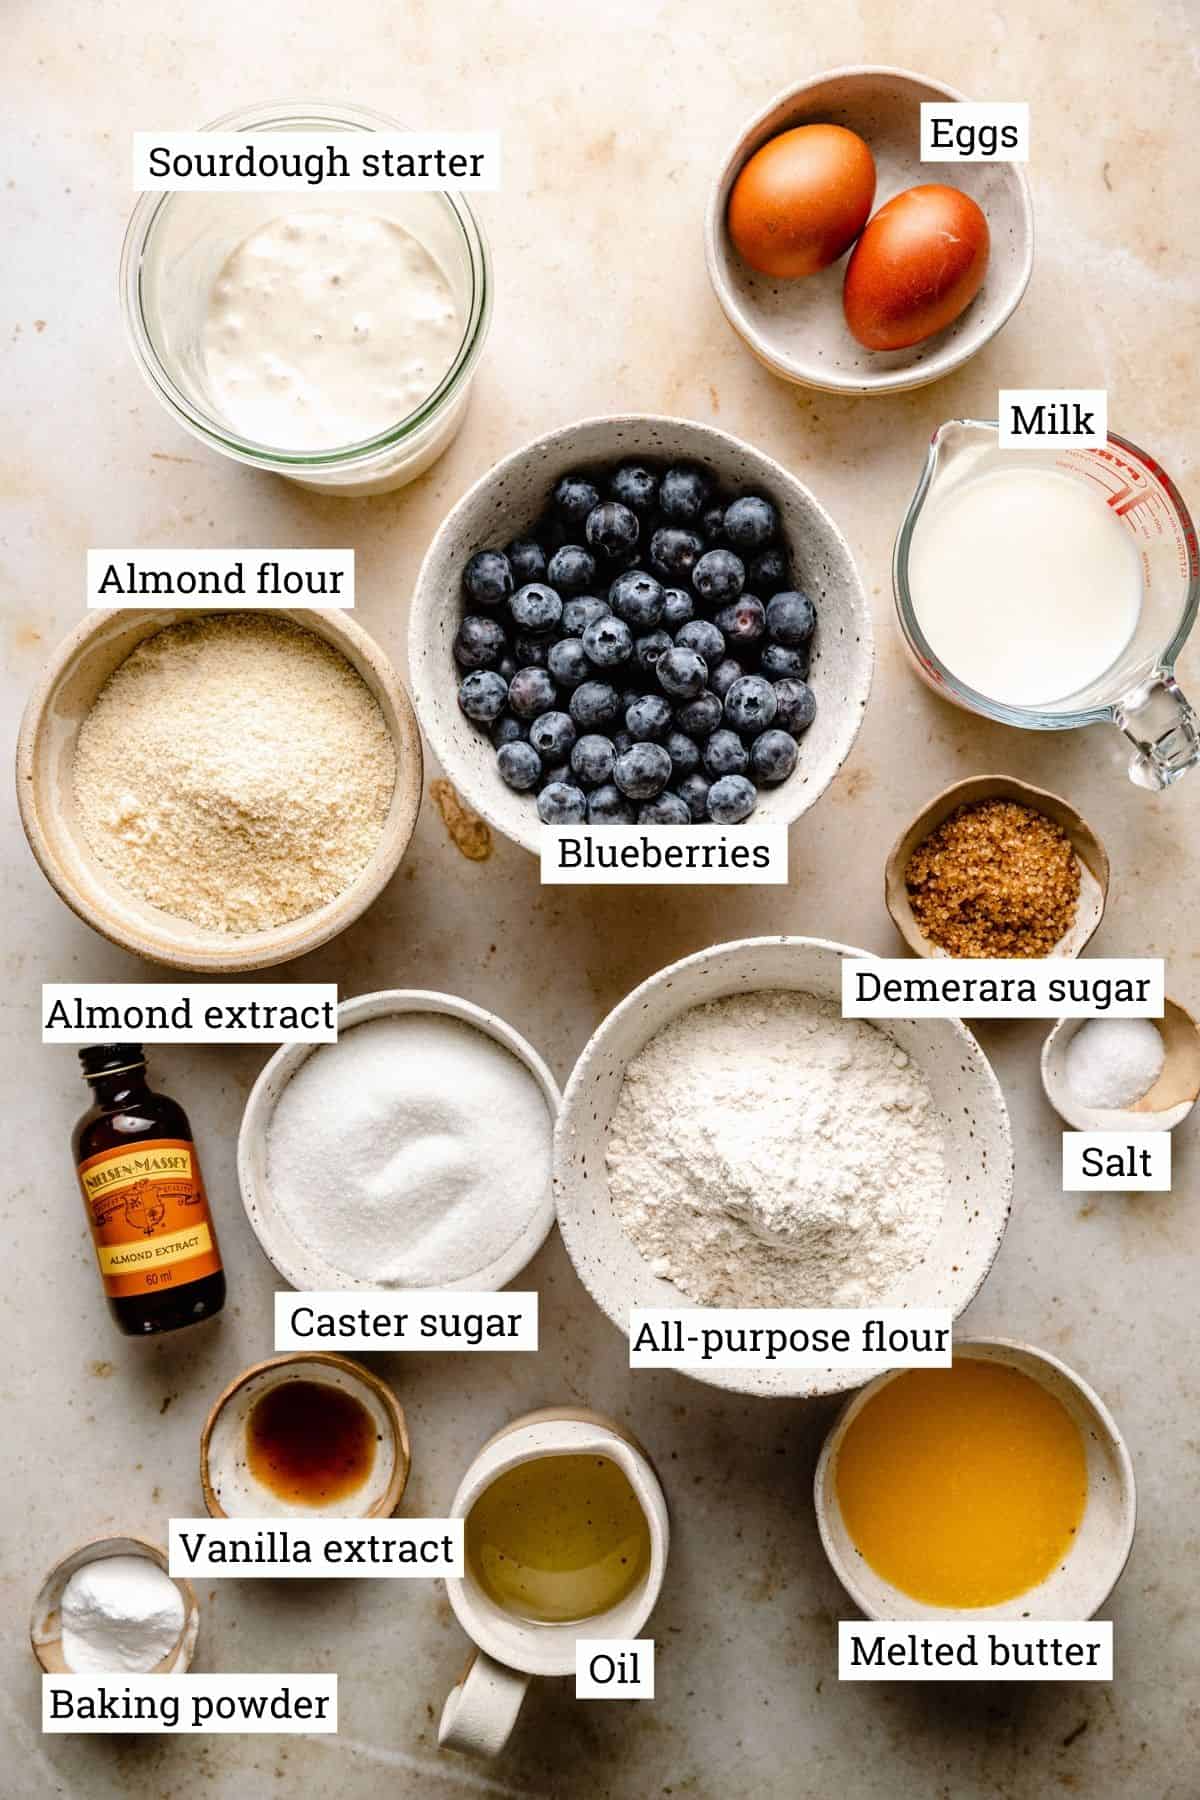 Ingredients for muffins on a warm background with labels.